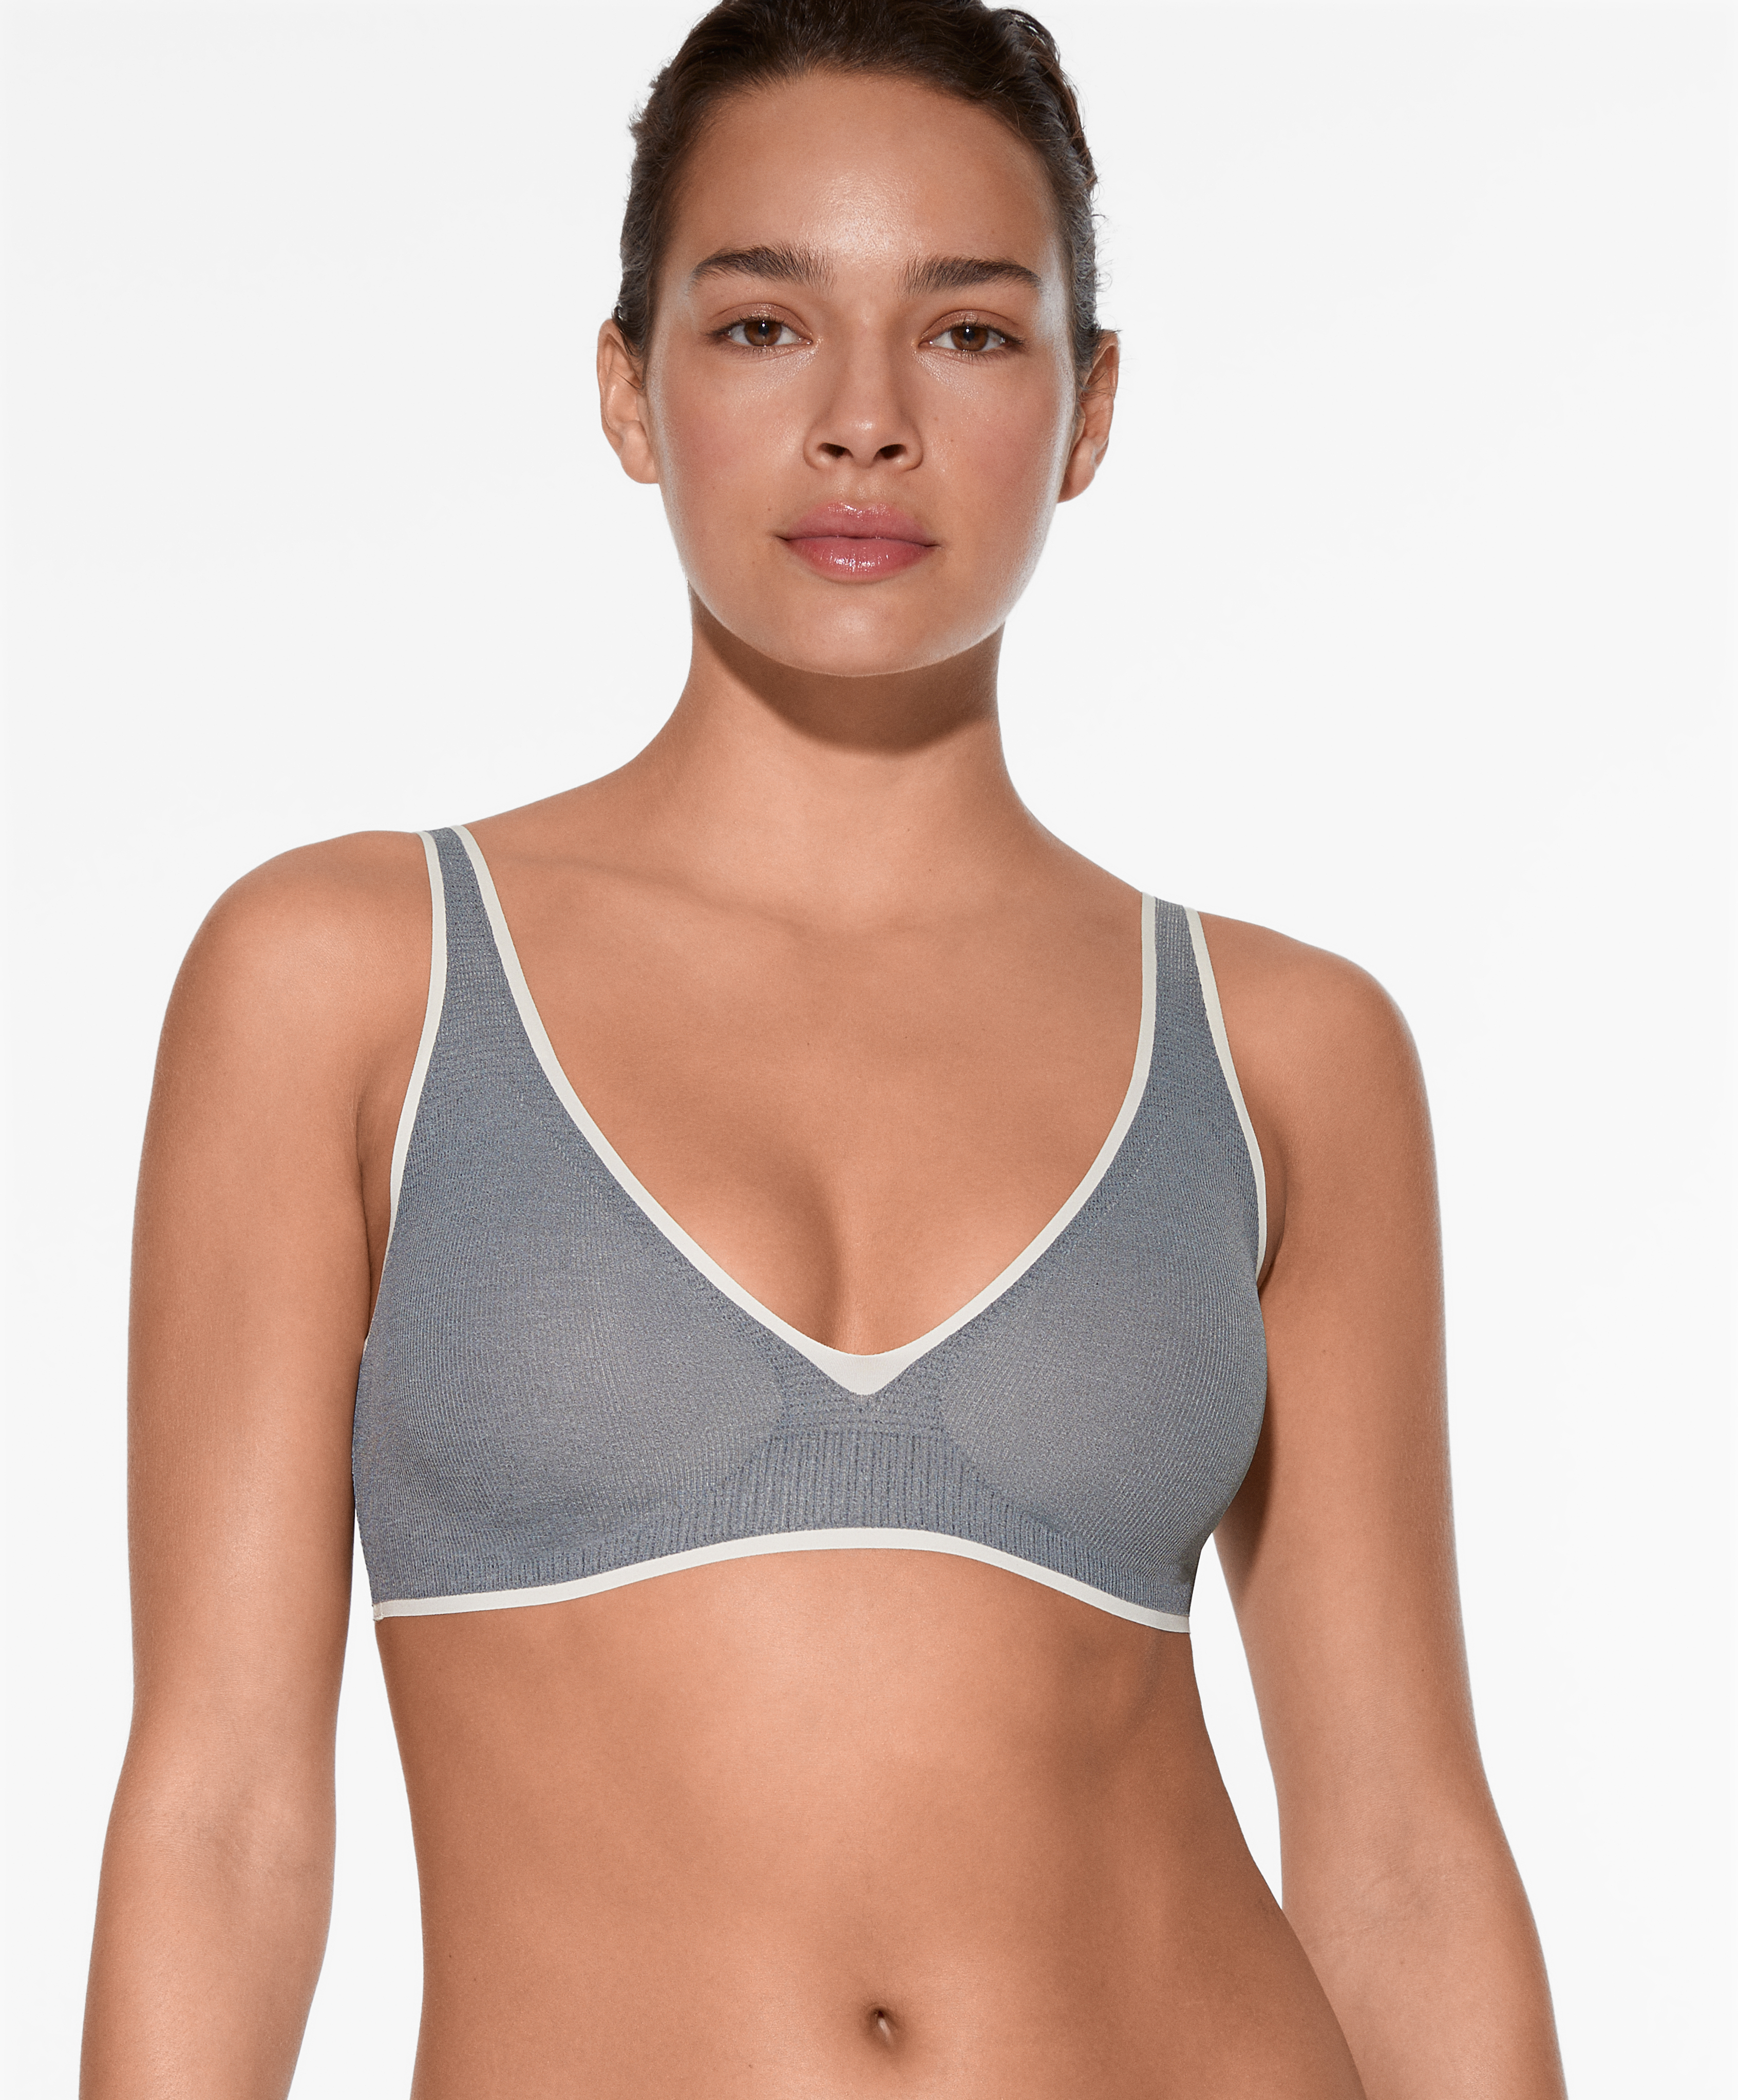 Invisible laser-cut halter bra - UNDERWEAR - VIEW BY PRODUCT